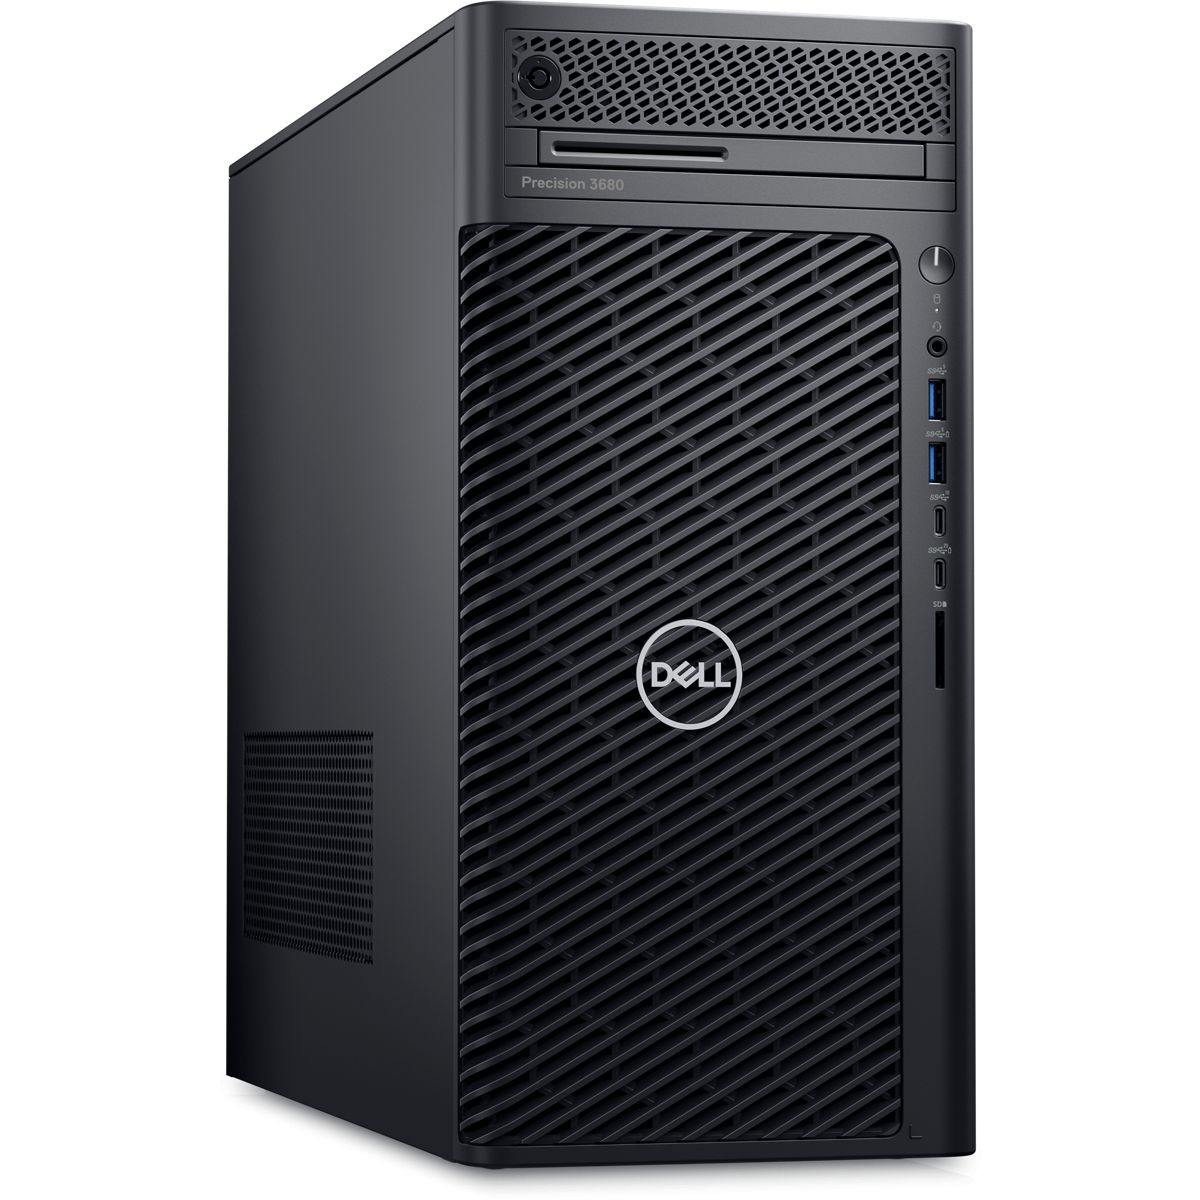 Dell Precision 3680 Tower,Intel Core i9-14900K(36MB,24Cores,32threads,3.2GHz/6.0GHz),32GB(2x16)4400MT/s DDR5,1TB(M.2)NVMe PCIe SSD,2TB(3.5)HDD 7200rpm,Nvidia RTX 4000 Ada/20GB,noWi-Fi,Dell Mouse-MS116,Dell Keyboard-KB216,Win11Pro,3Yr NBD_1